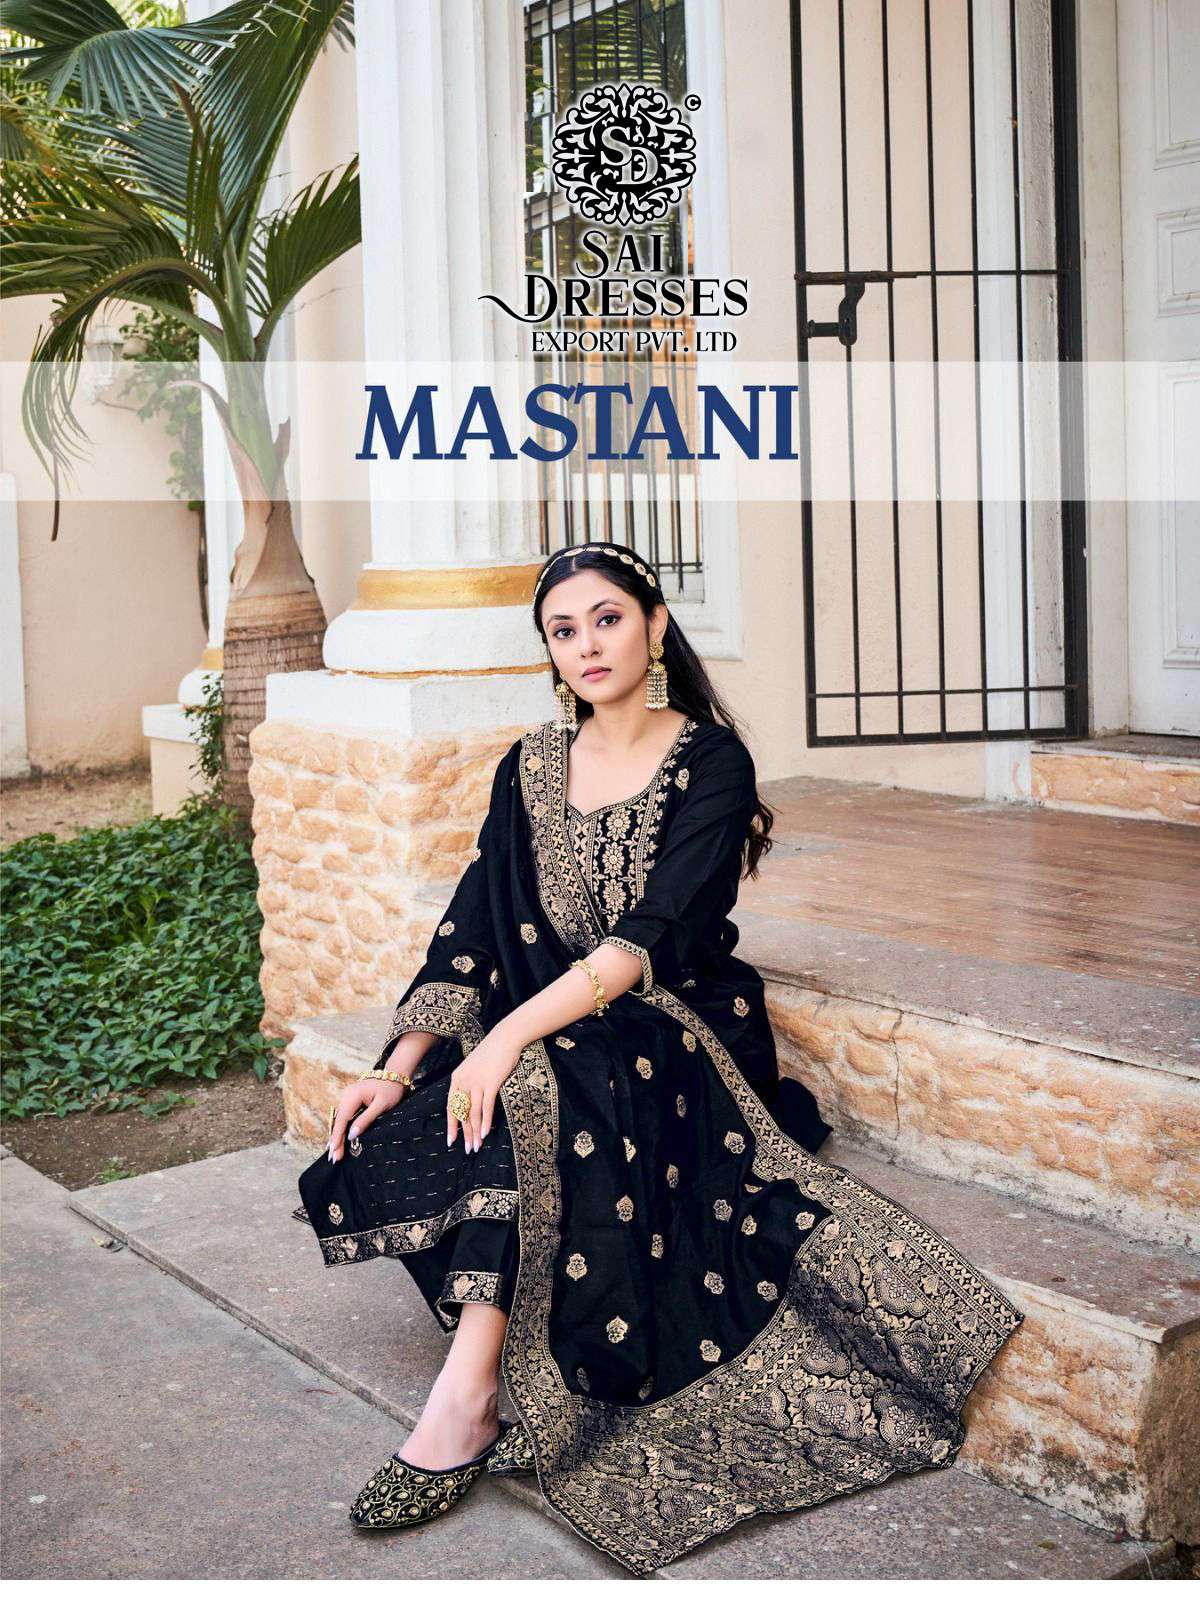 NET EMBROIDERED DRESS - 5547.1 - L / 2 Piece | Mastani dress, Party wear  indian dresses, Indian gowns dresses